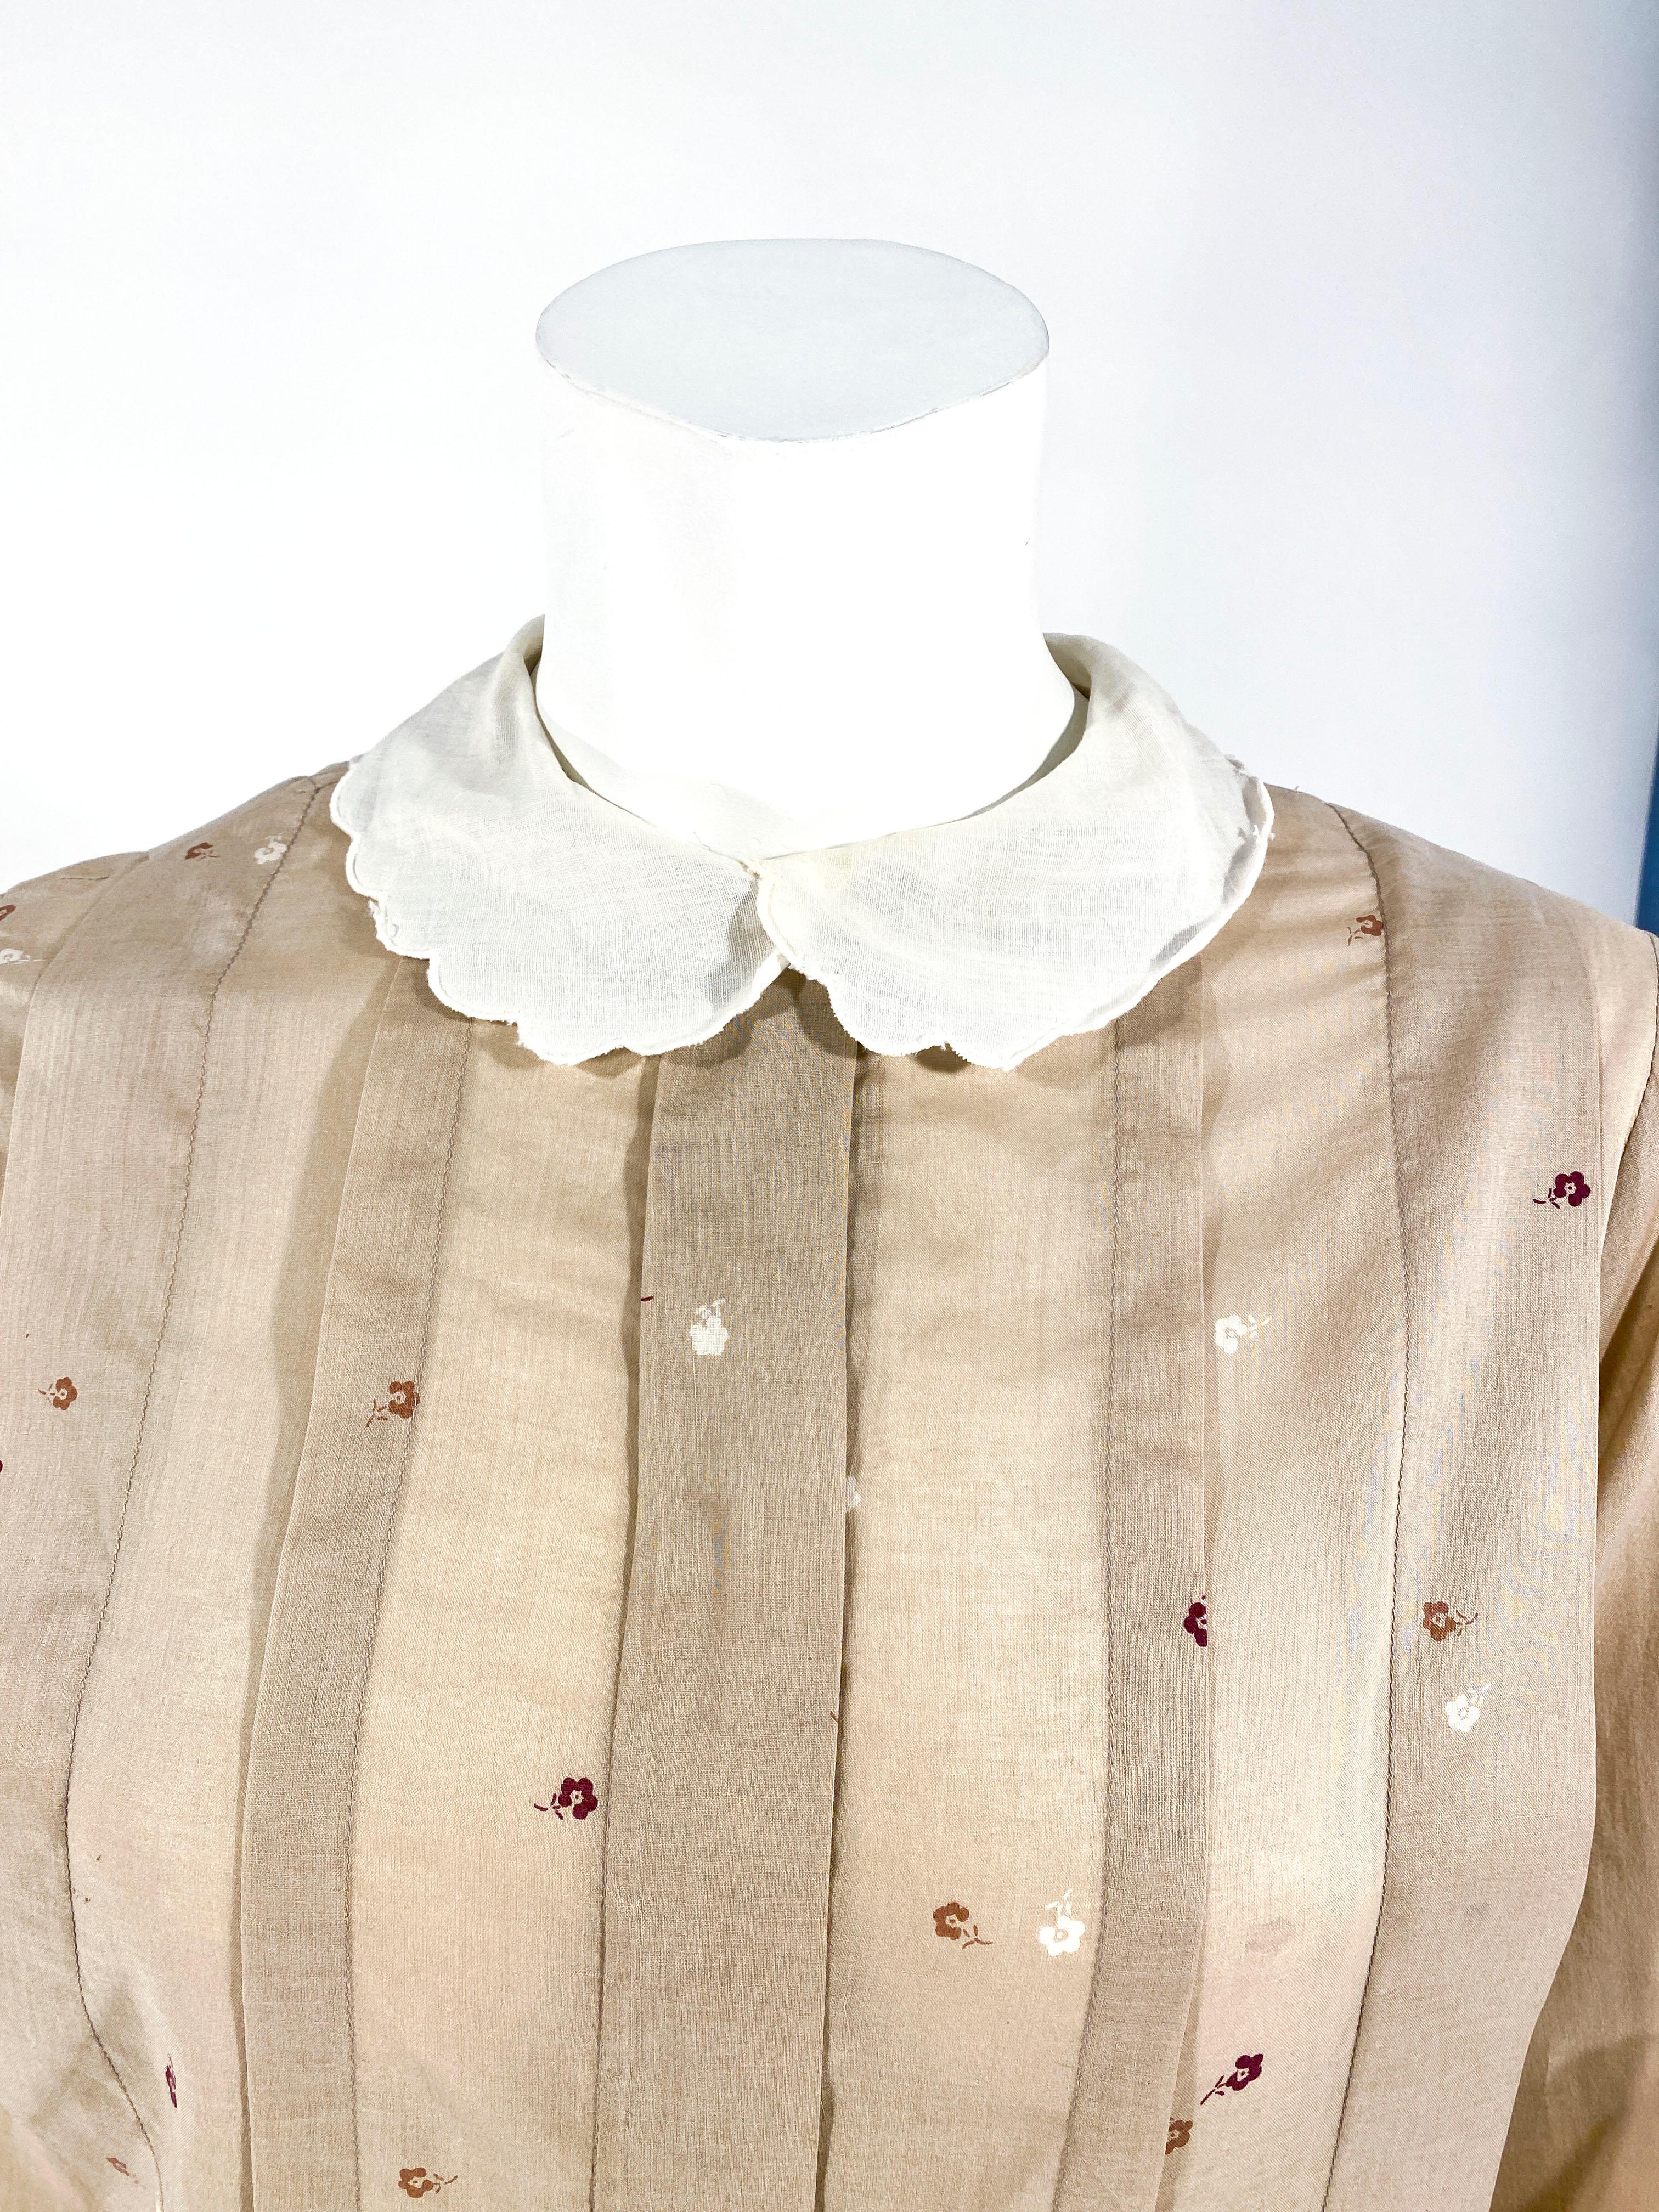 1970s Christian Dior cotton printed blouse with large knife pleats on the face of the garment, full pleated sleeves, and a scalloped peter-pan collar. The print is a vintage floral pattern with touches of maroon, tan, and cream colored flowers.